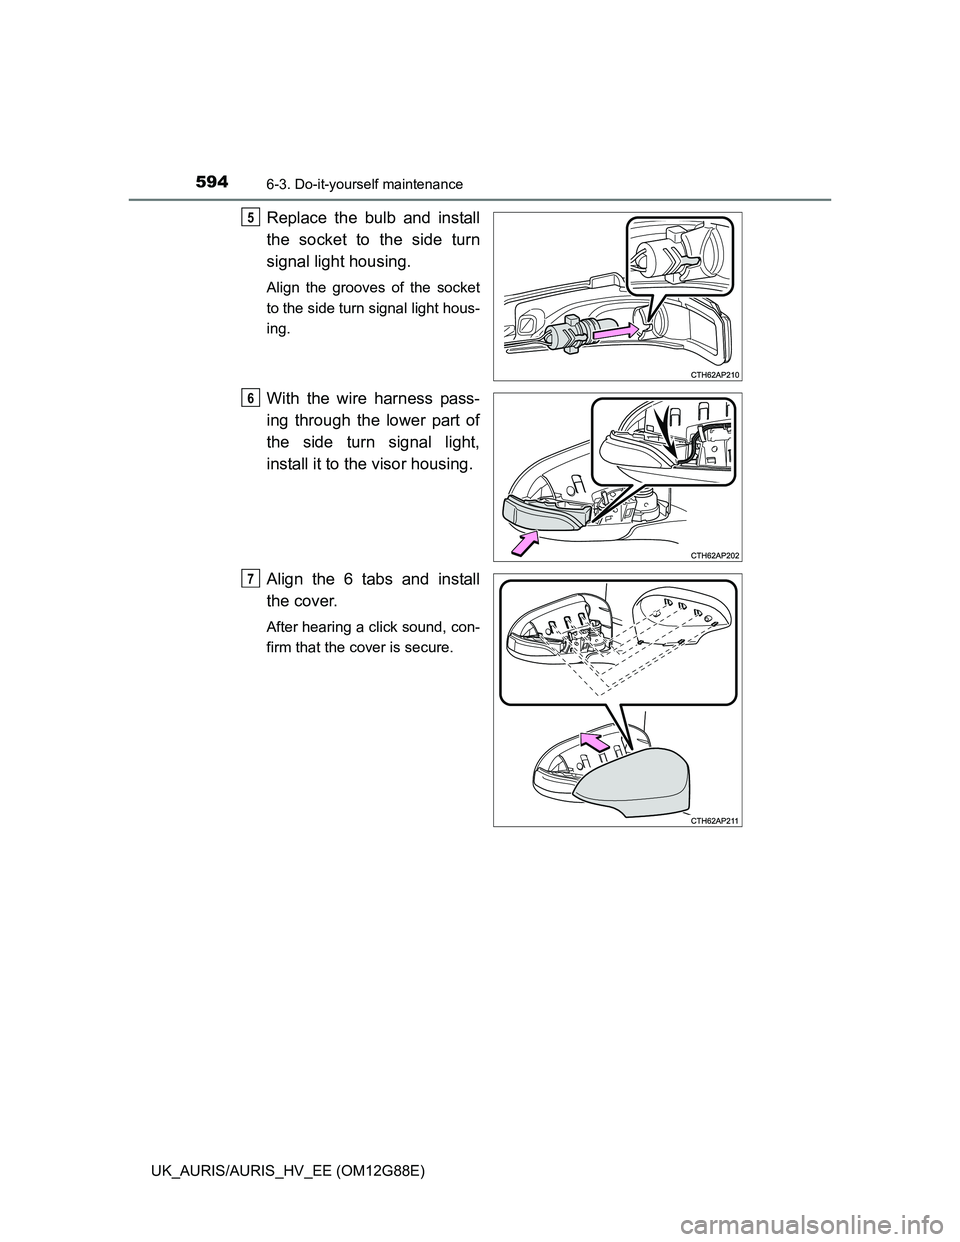 TOYOTA AURIS HYBRID 2014  Owners Manual 5946-3. Do-it-yourself maintenance
UK_AURIS/AURIS_HV_EE (OM12G88E)
Replace the bulb and install
the socket to the side turn
signal light housing.
Align the grooves of the socket
to the side turn signa